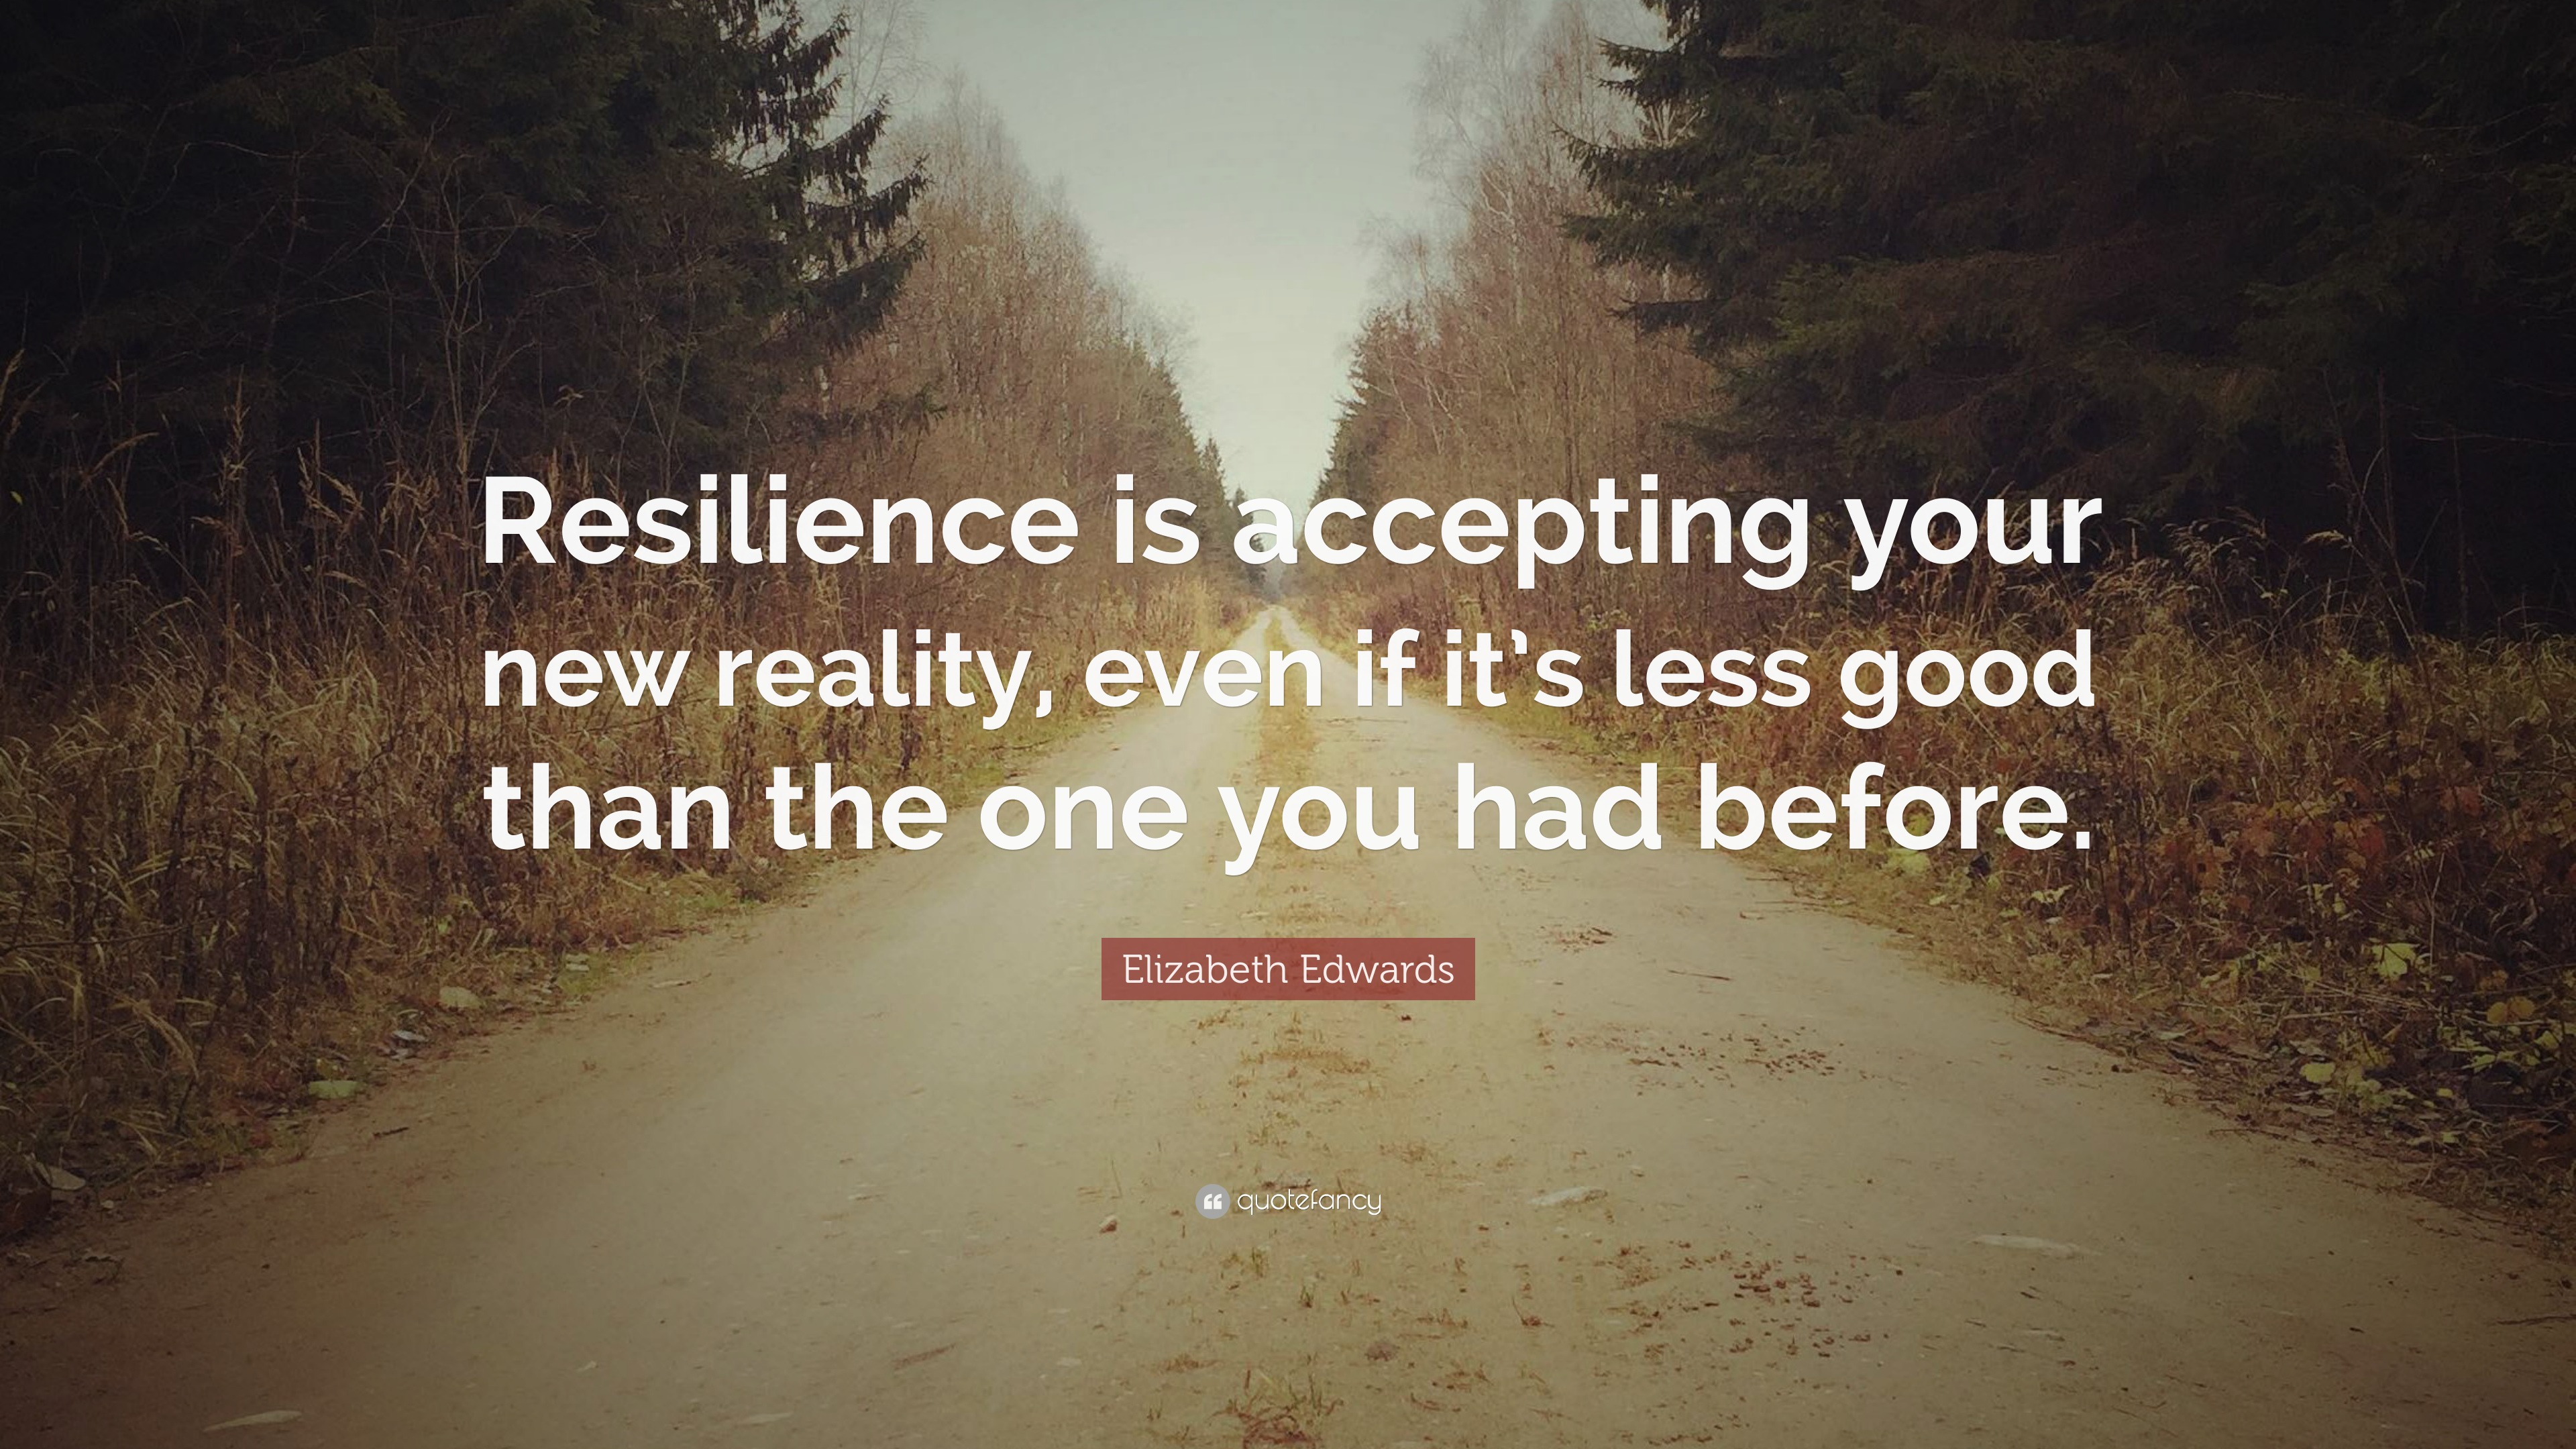 Elizabeth Edwards Quote: “Resilience is accepting your new reality ...